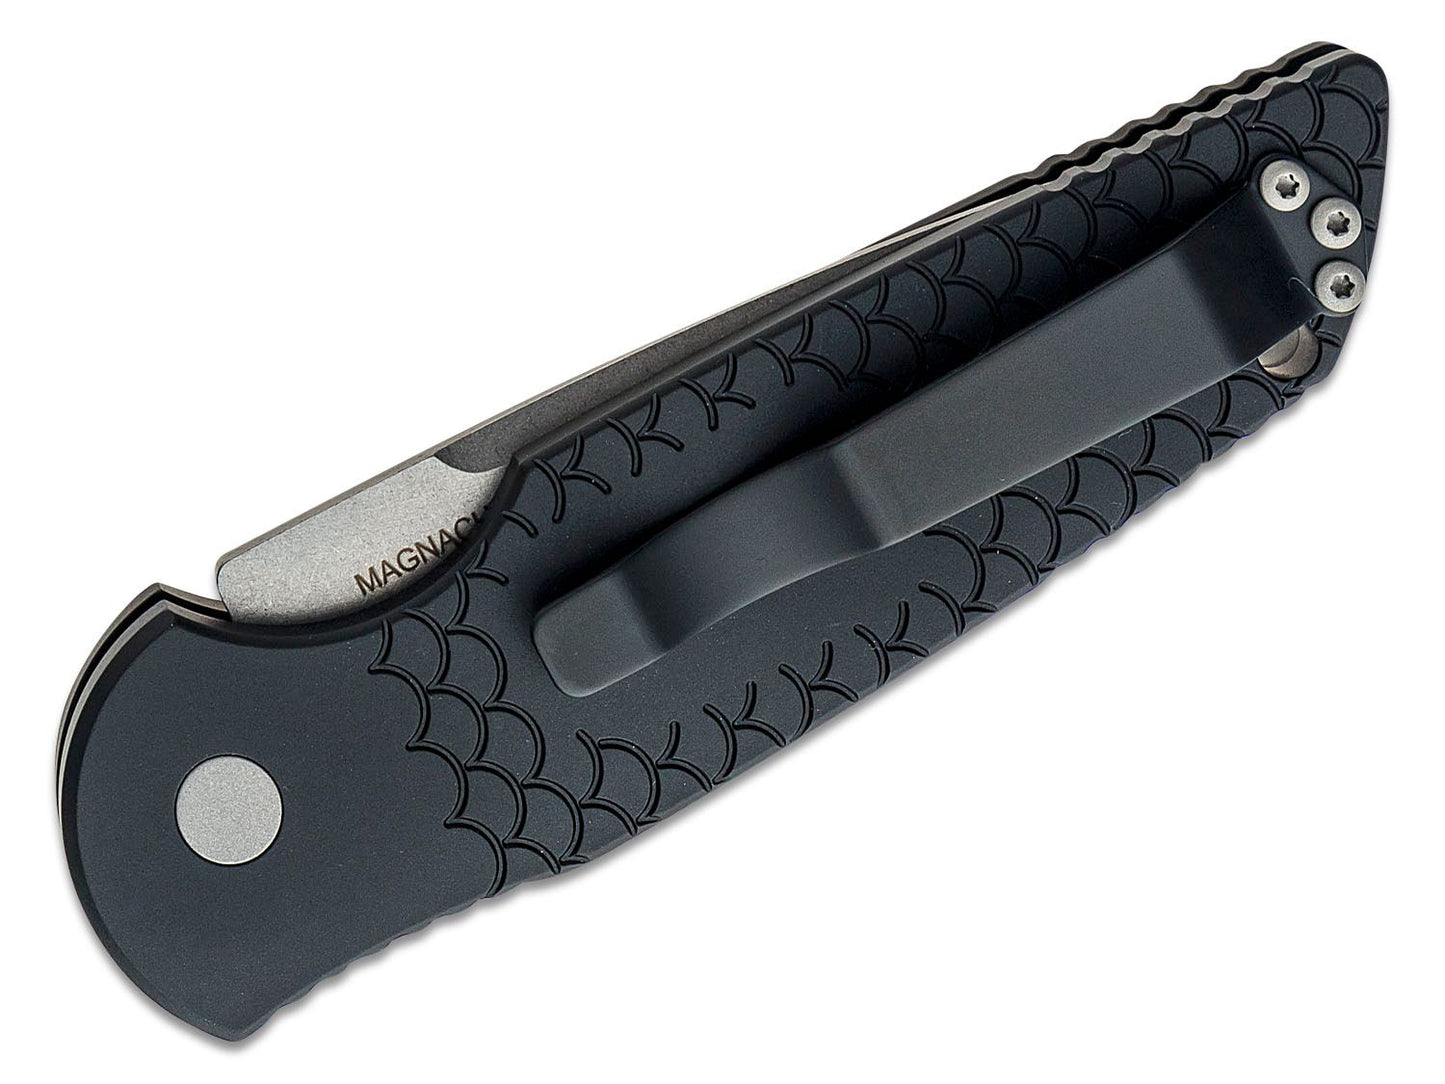 TR-3 MC-1 Tactical Response III AUTO Folding Knife 3.375" CPM-MagnaCut Stonewashed Plain Blade, Black Fish Scale Milled Aluminum Handles with Safety